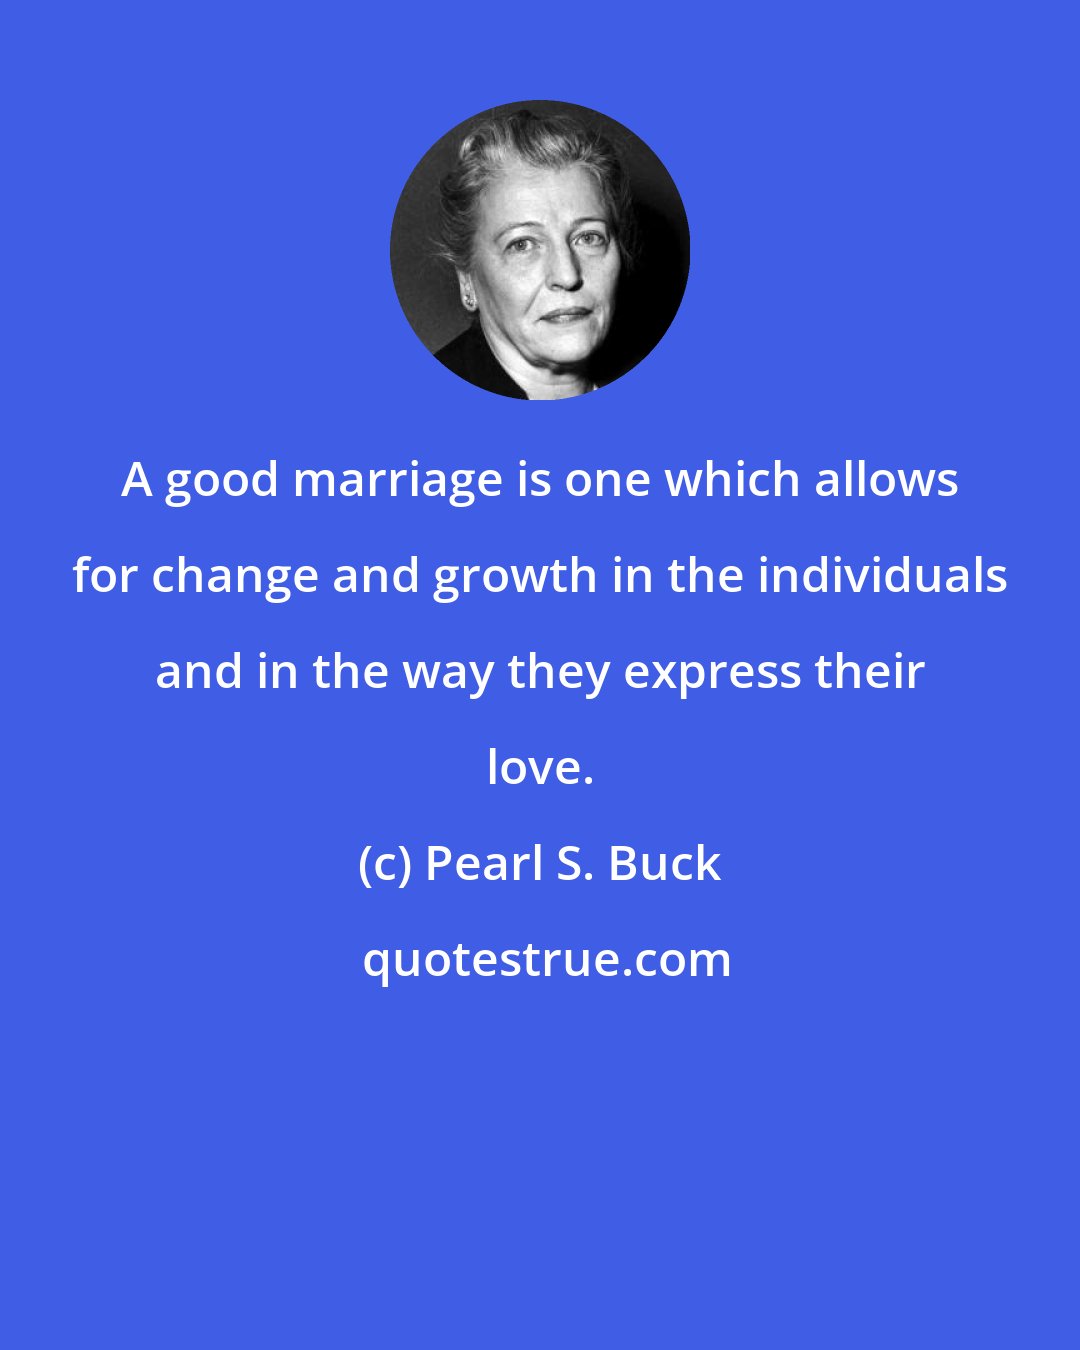 Pearl S. Buck: A good marriage is one which allows for change and growth in the individuals and in the way they express their love.